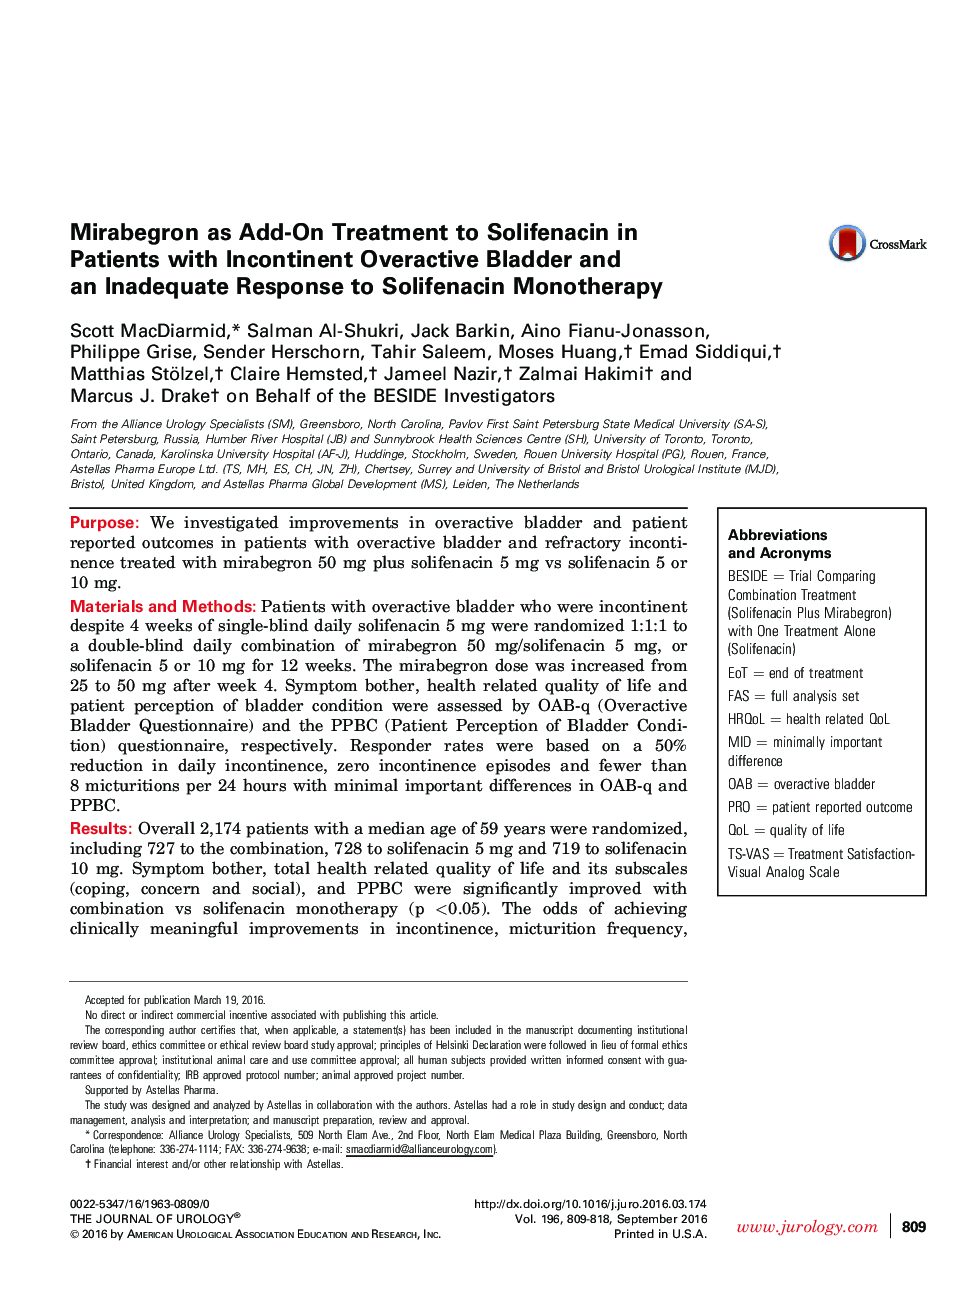 Mirabegron as Add-On Treatment to Solifenacin in Patients with Incontinent Overactive Bladder and an Inadequate Response to Solifenacin Monotherapy 